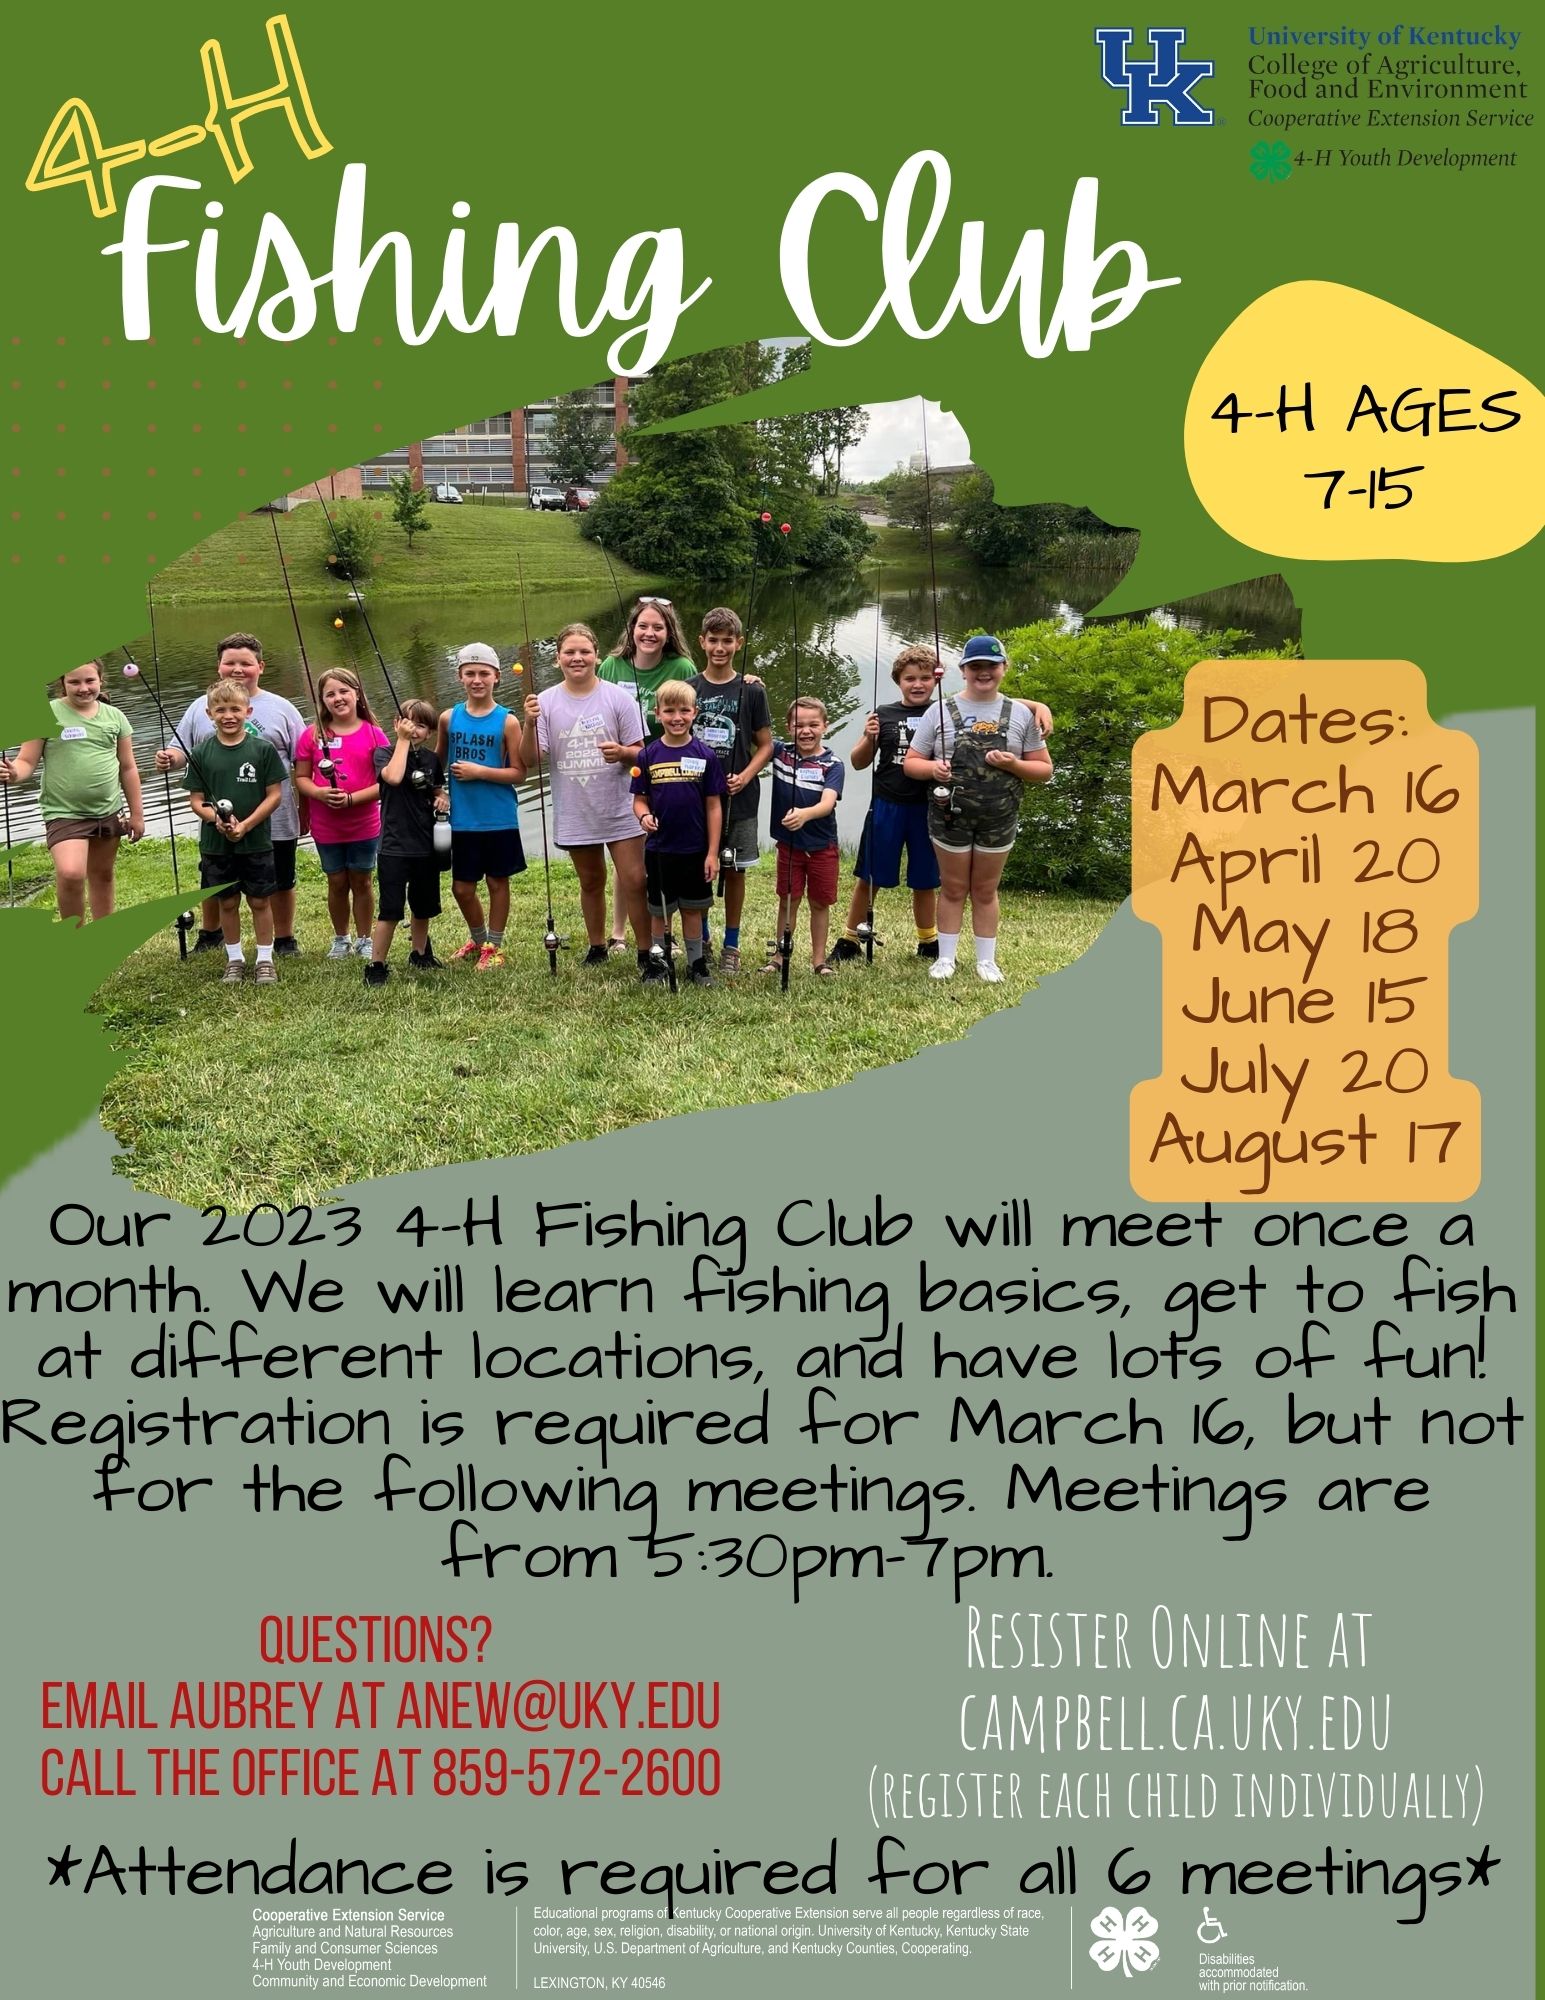 4-H Fishing Club: for youth ages 7-15. They will meet on the following dates: March 16, April 20, May 18, June 15, July 20, and August 17 from 5:30-7pm. Some meetings will be at the Cooperative Extension Office, some will be at the EEC. Call 859-572-2600 to register!